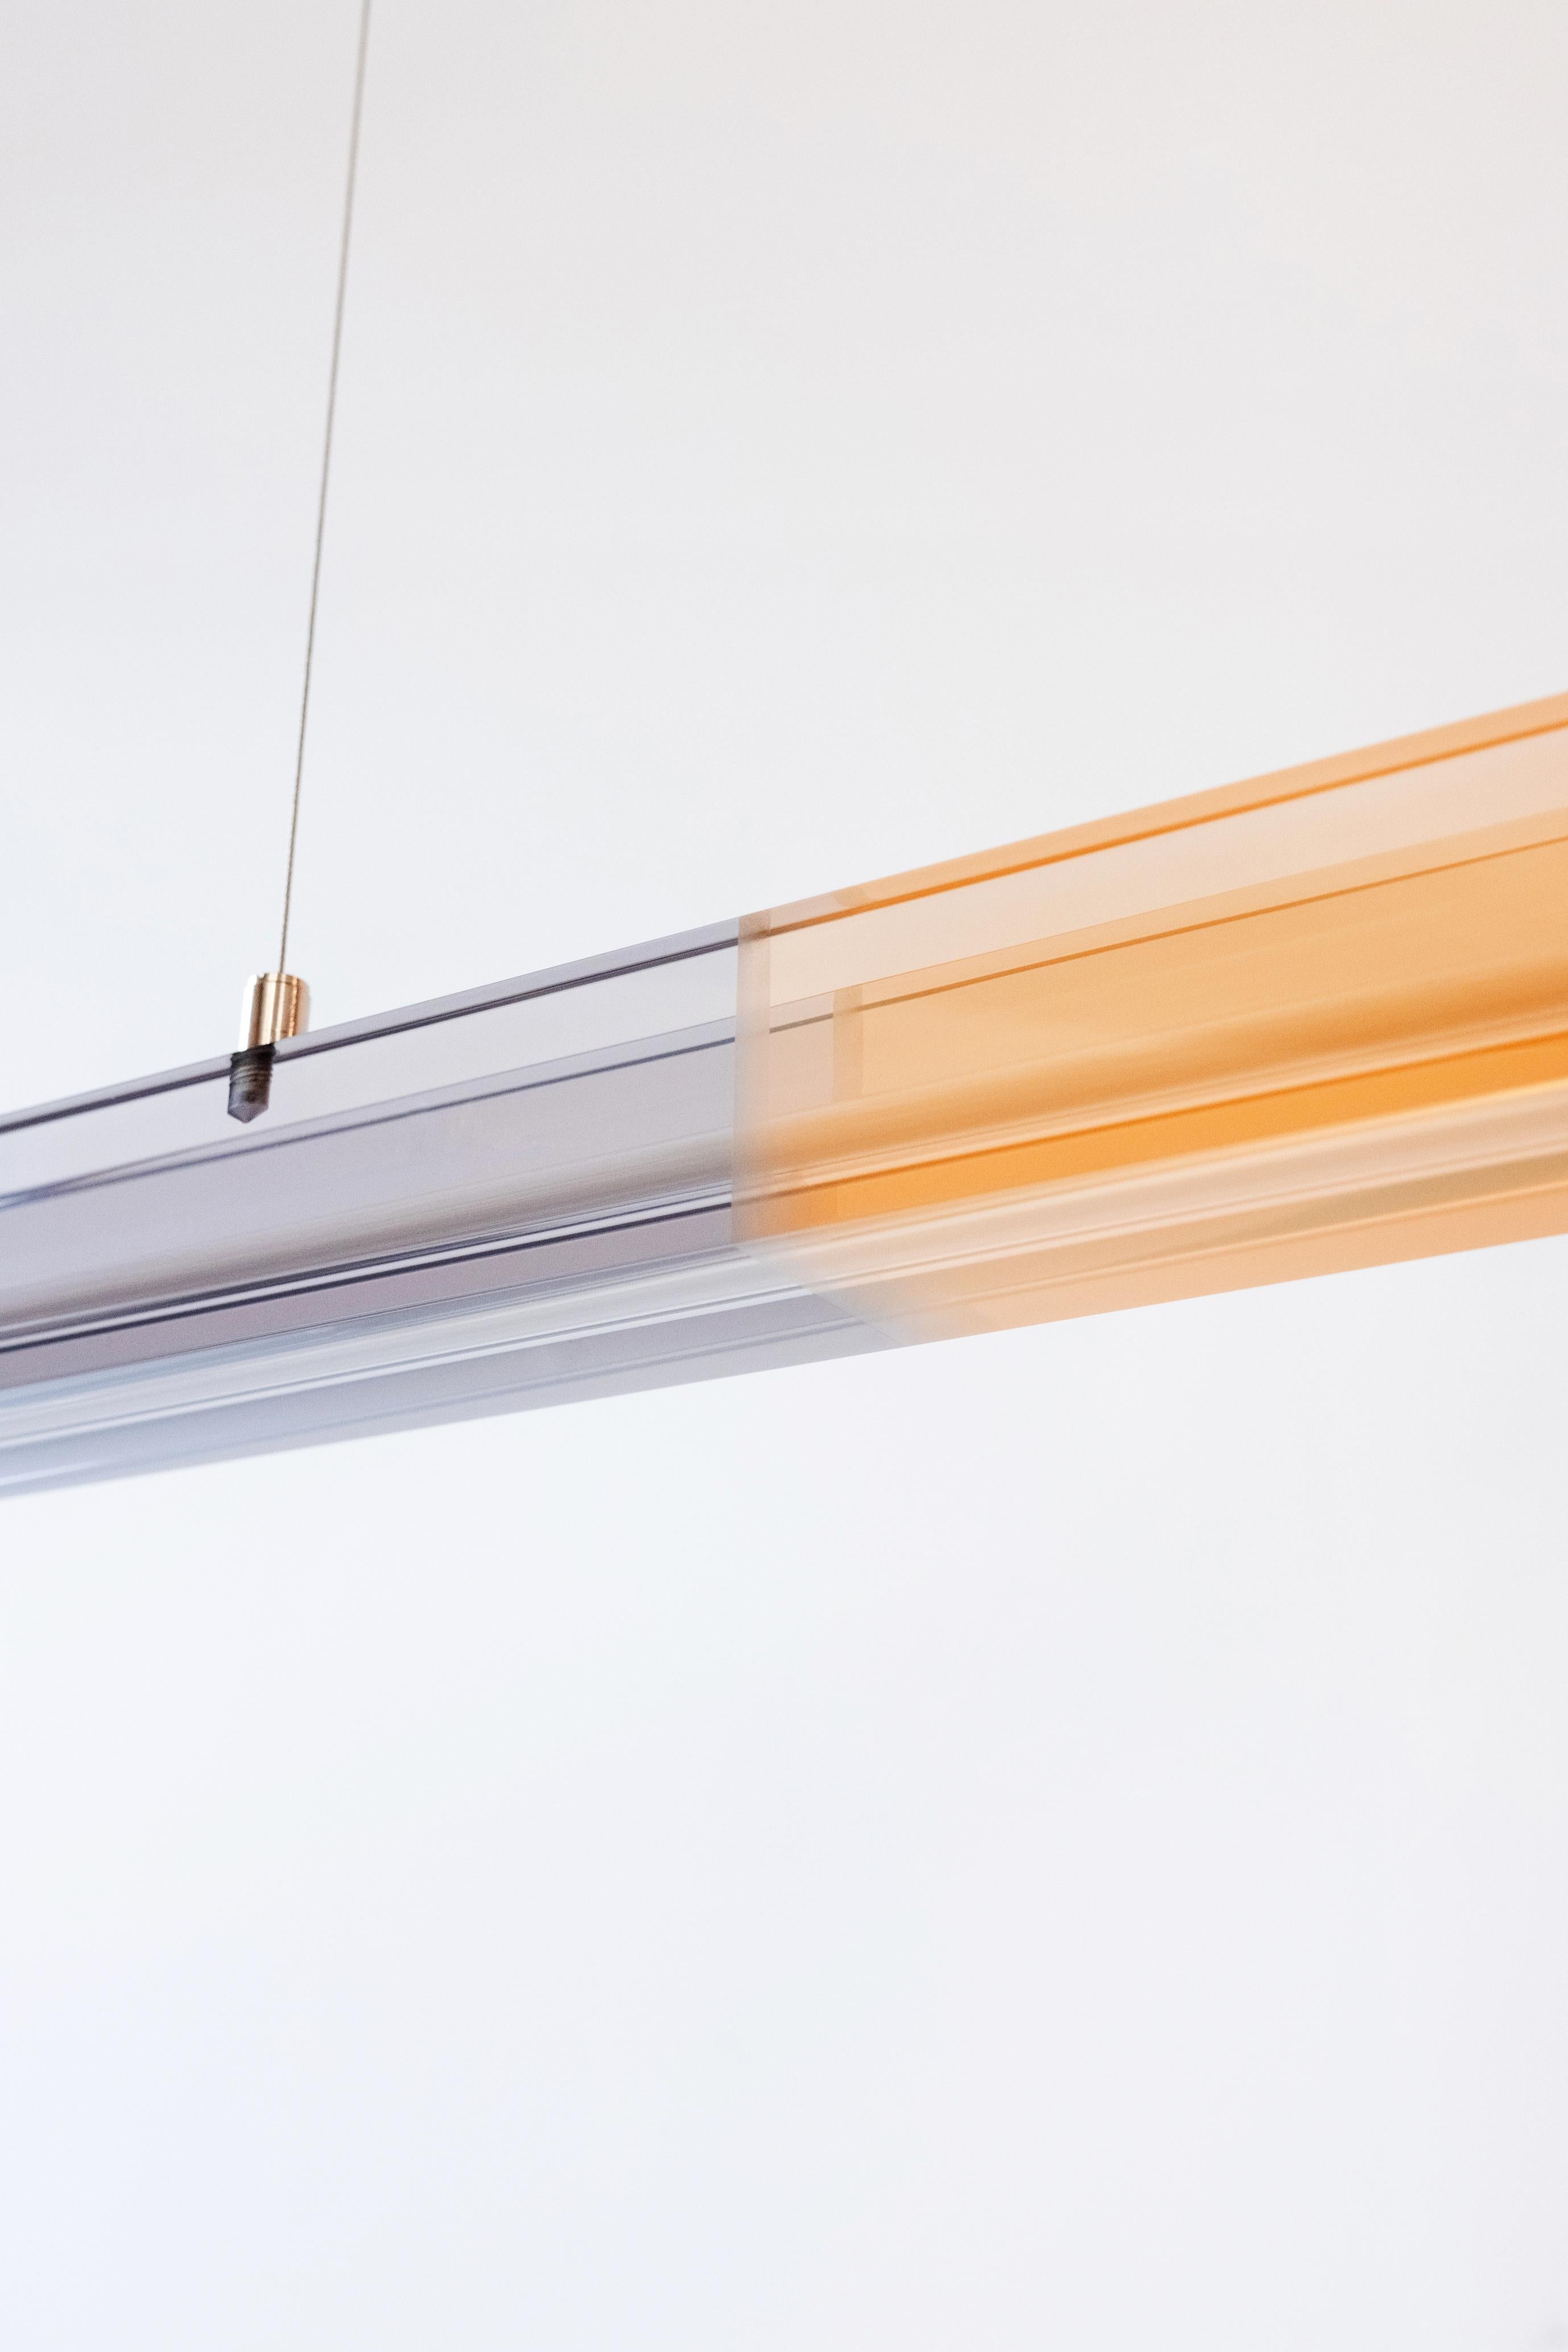 Sabine Marcelis Contemporary Horizontal Ochre Resin Chandelier, Filter Series In New Condition For Sale In Barcelona, ES